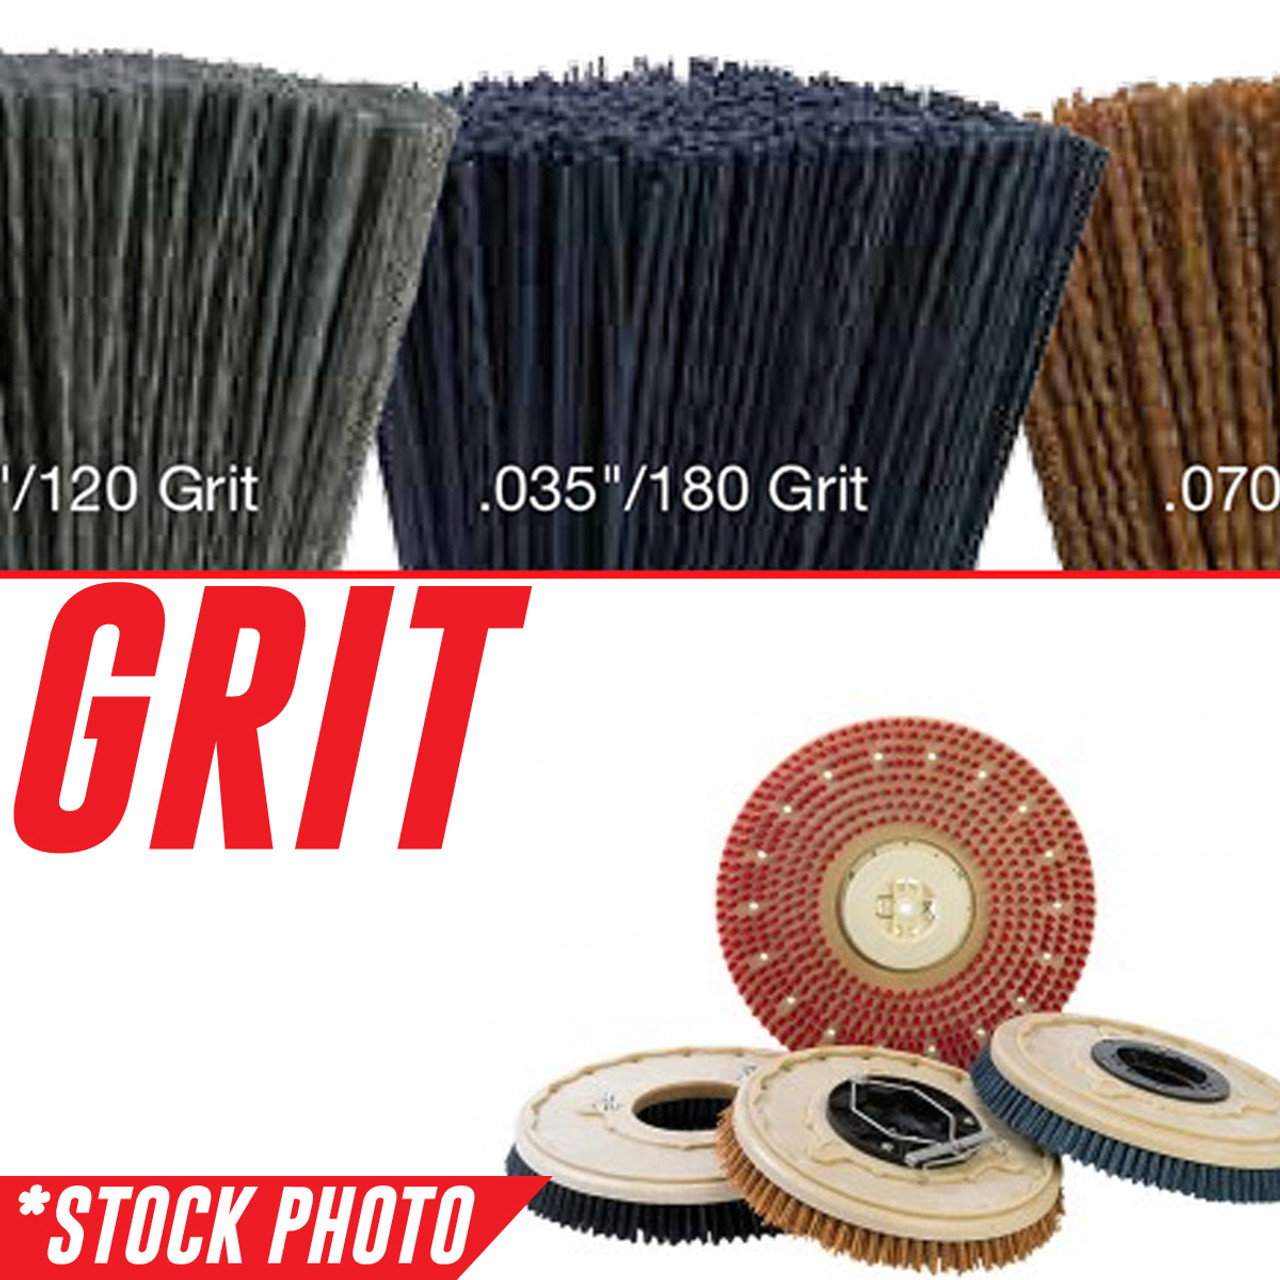 7-521SS: 16" Rotary Brush .070"/46 Grit fits Factory Cat Models 35